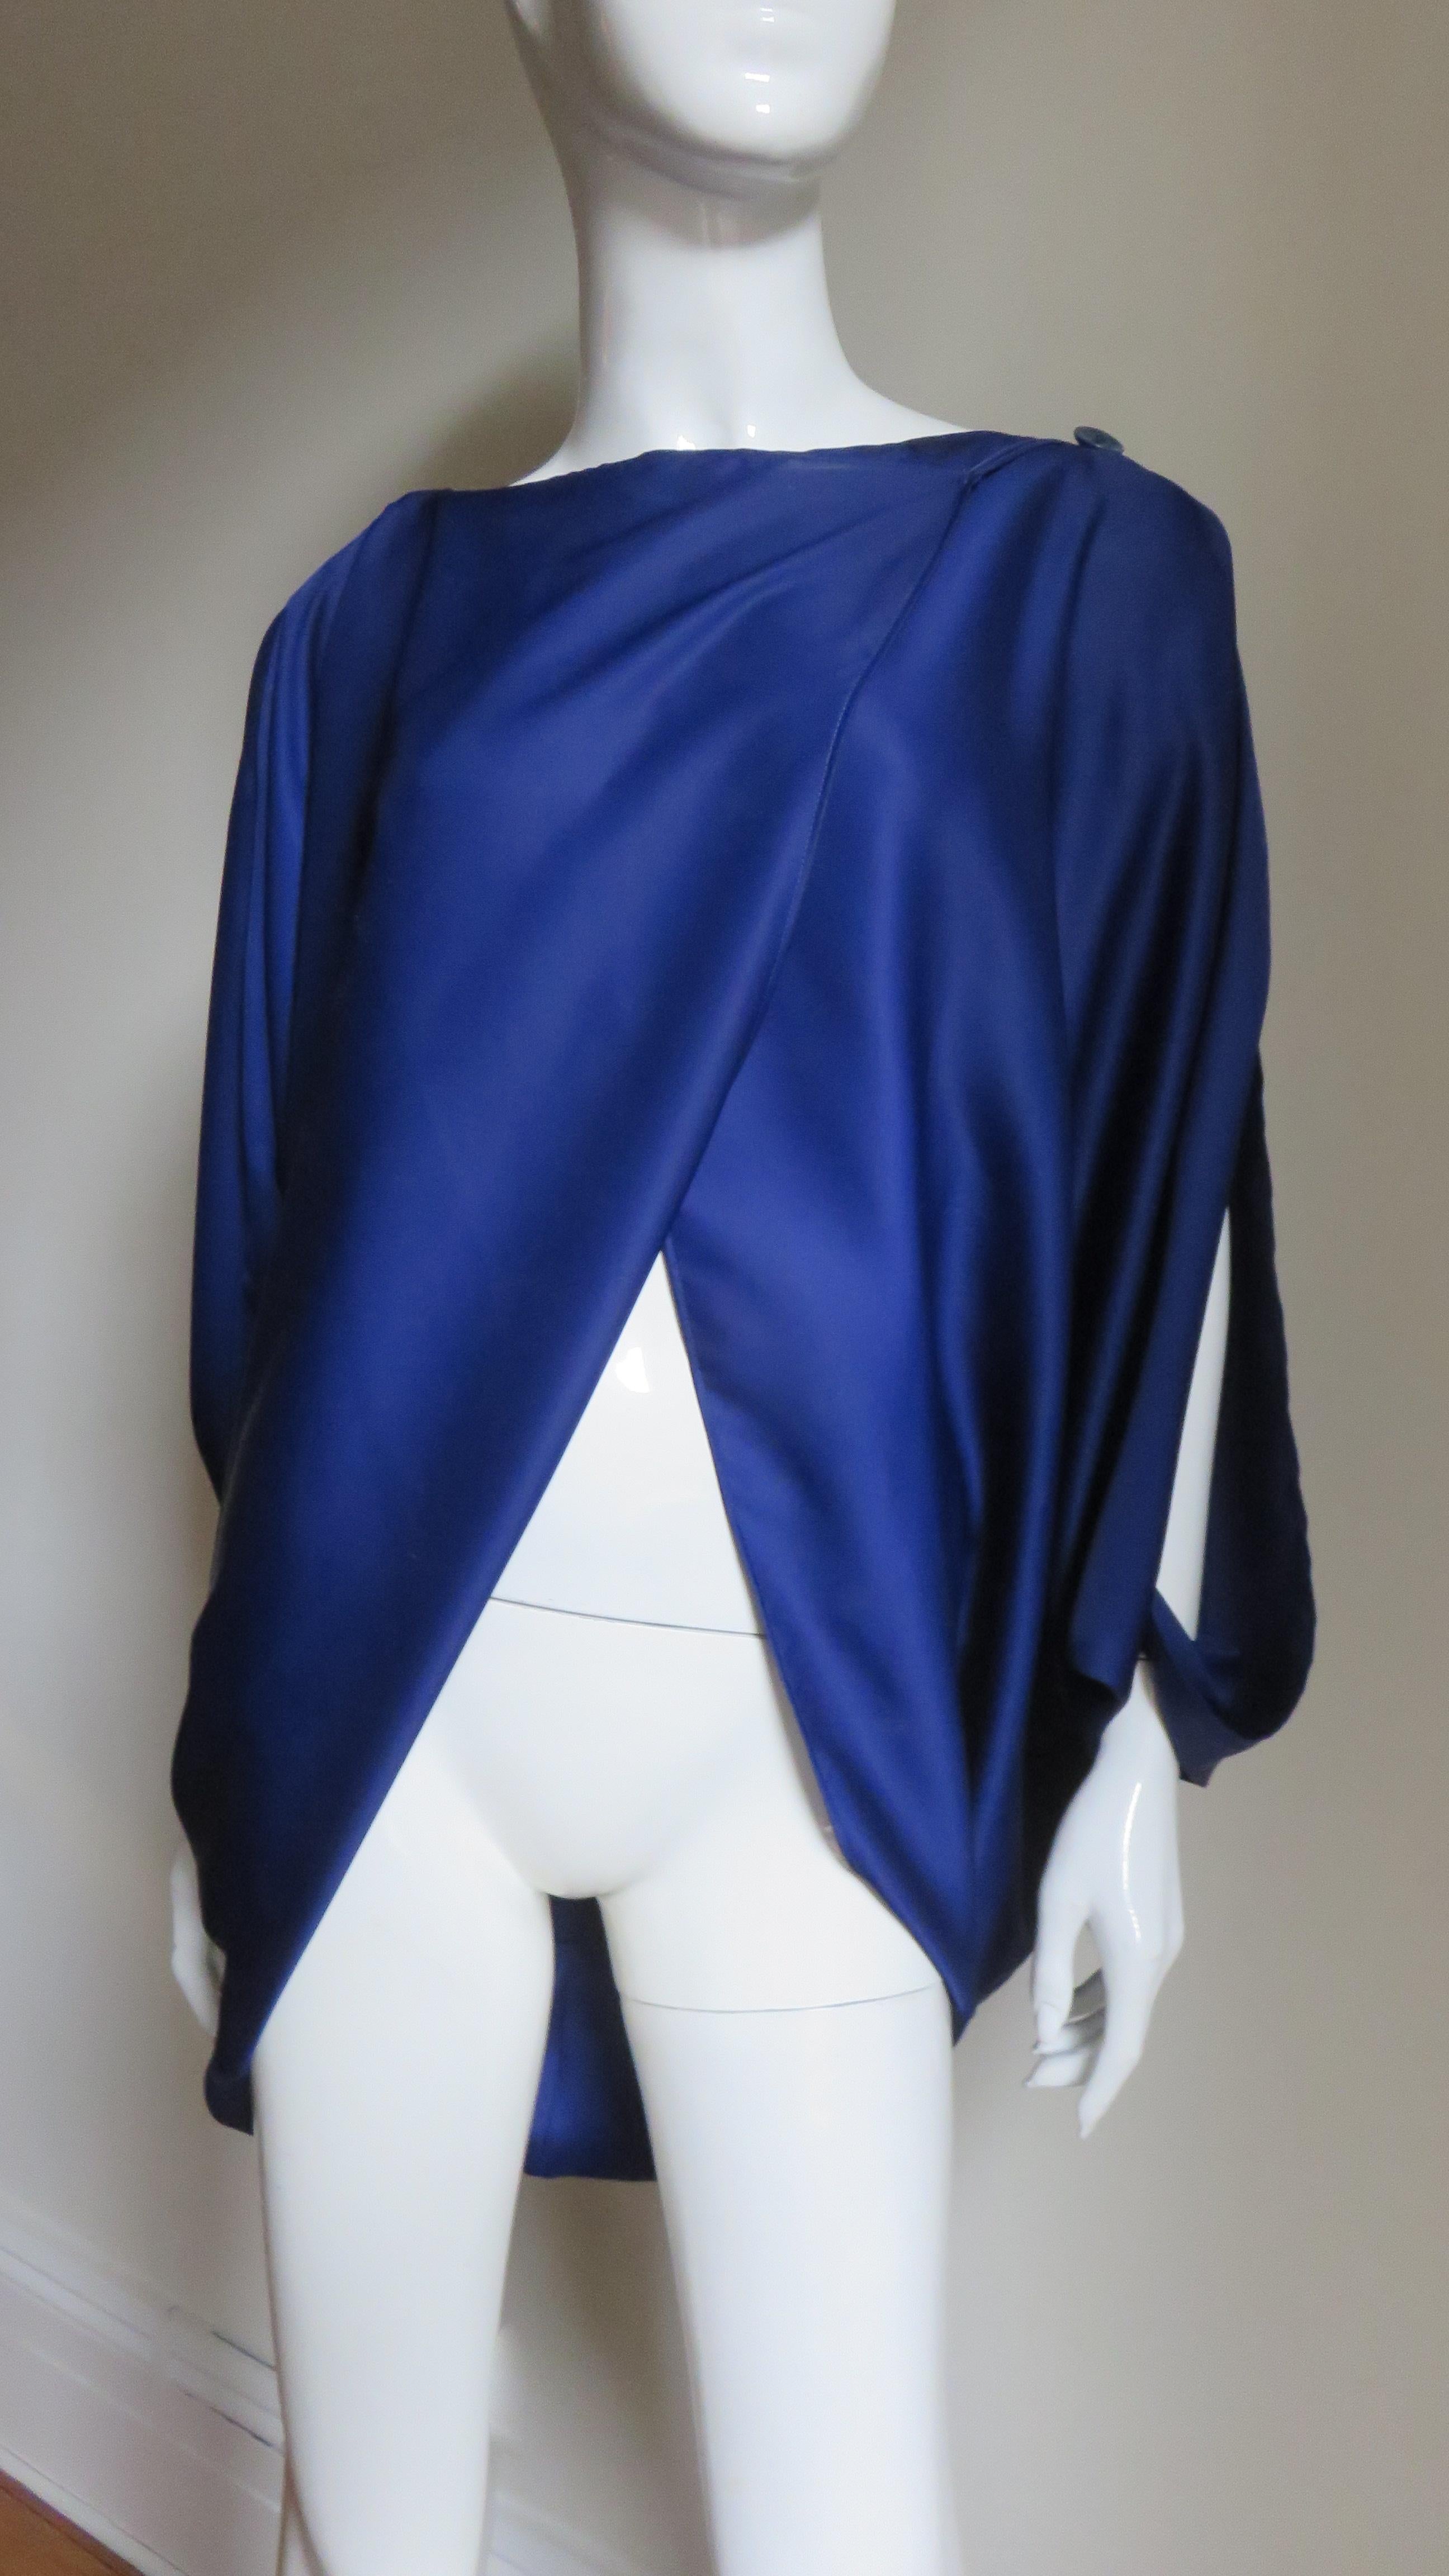 A fabulous blue top, shirt from Issey Miyake.  It overlapping at the front exposing the waist and buttons at the shoulder.  The back is fuller and longer and the sleeves are open from shoulder to wrist.
Fits sizes Small, Medium, Large.  One size